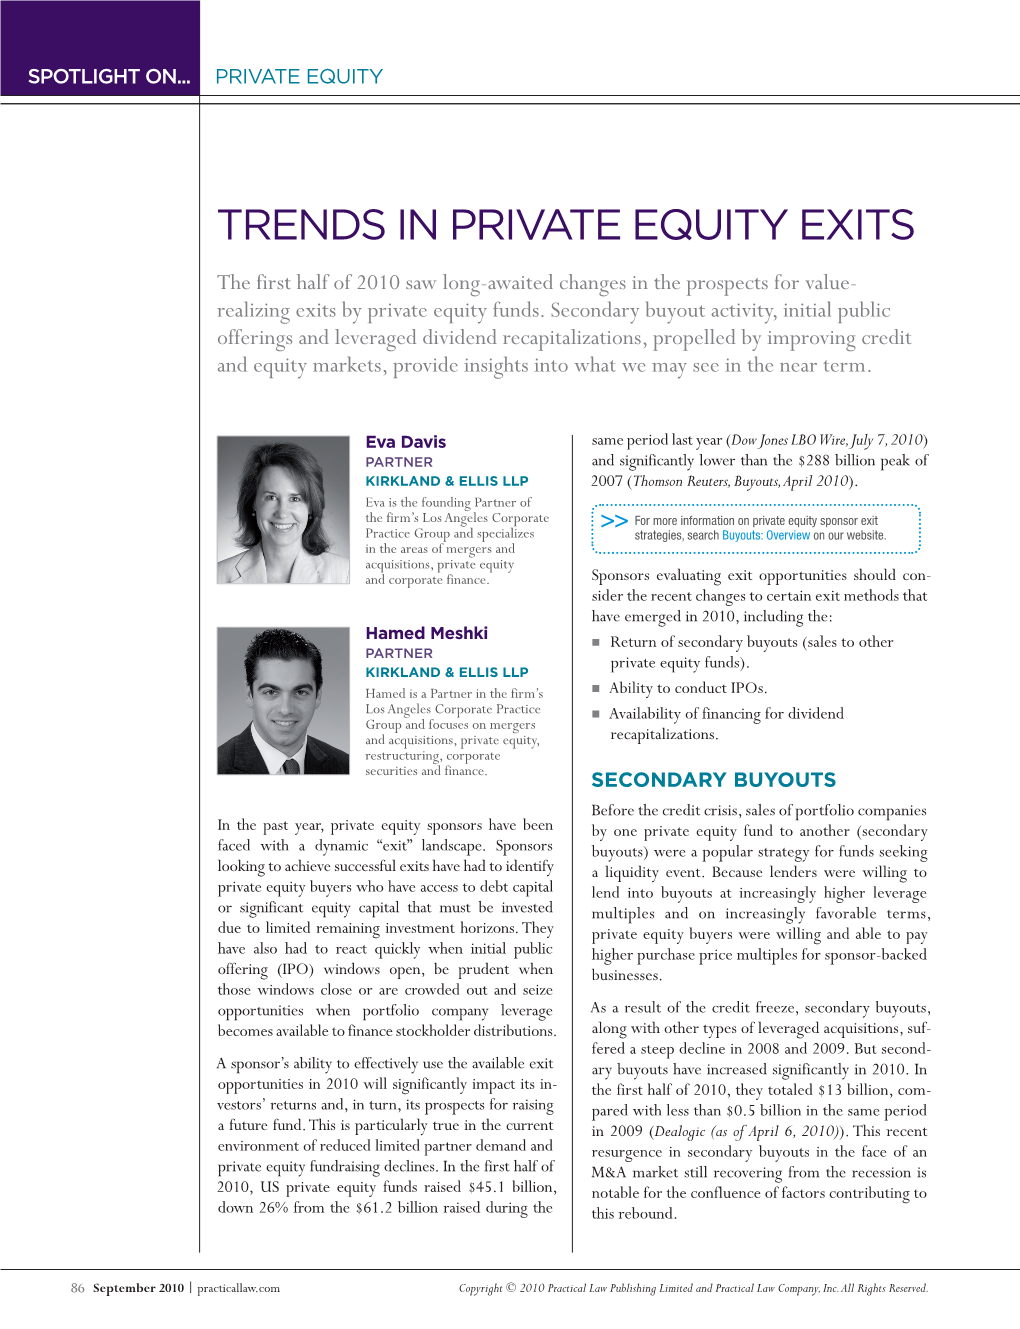 TRENDS in PRIVATE EQUITY EXITS the First Half of 2010 Saw Long-Awaited Changes in the Prospects for Value- Realizing Exits by Private Equity Funds